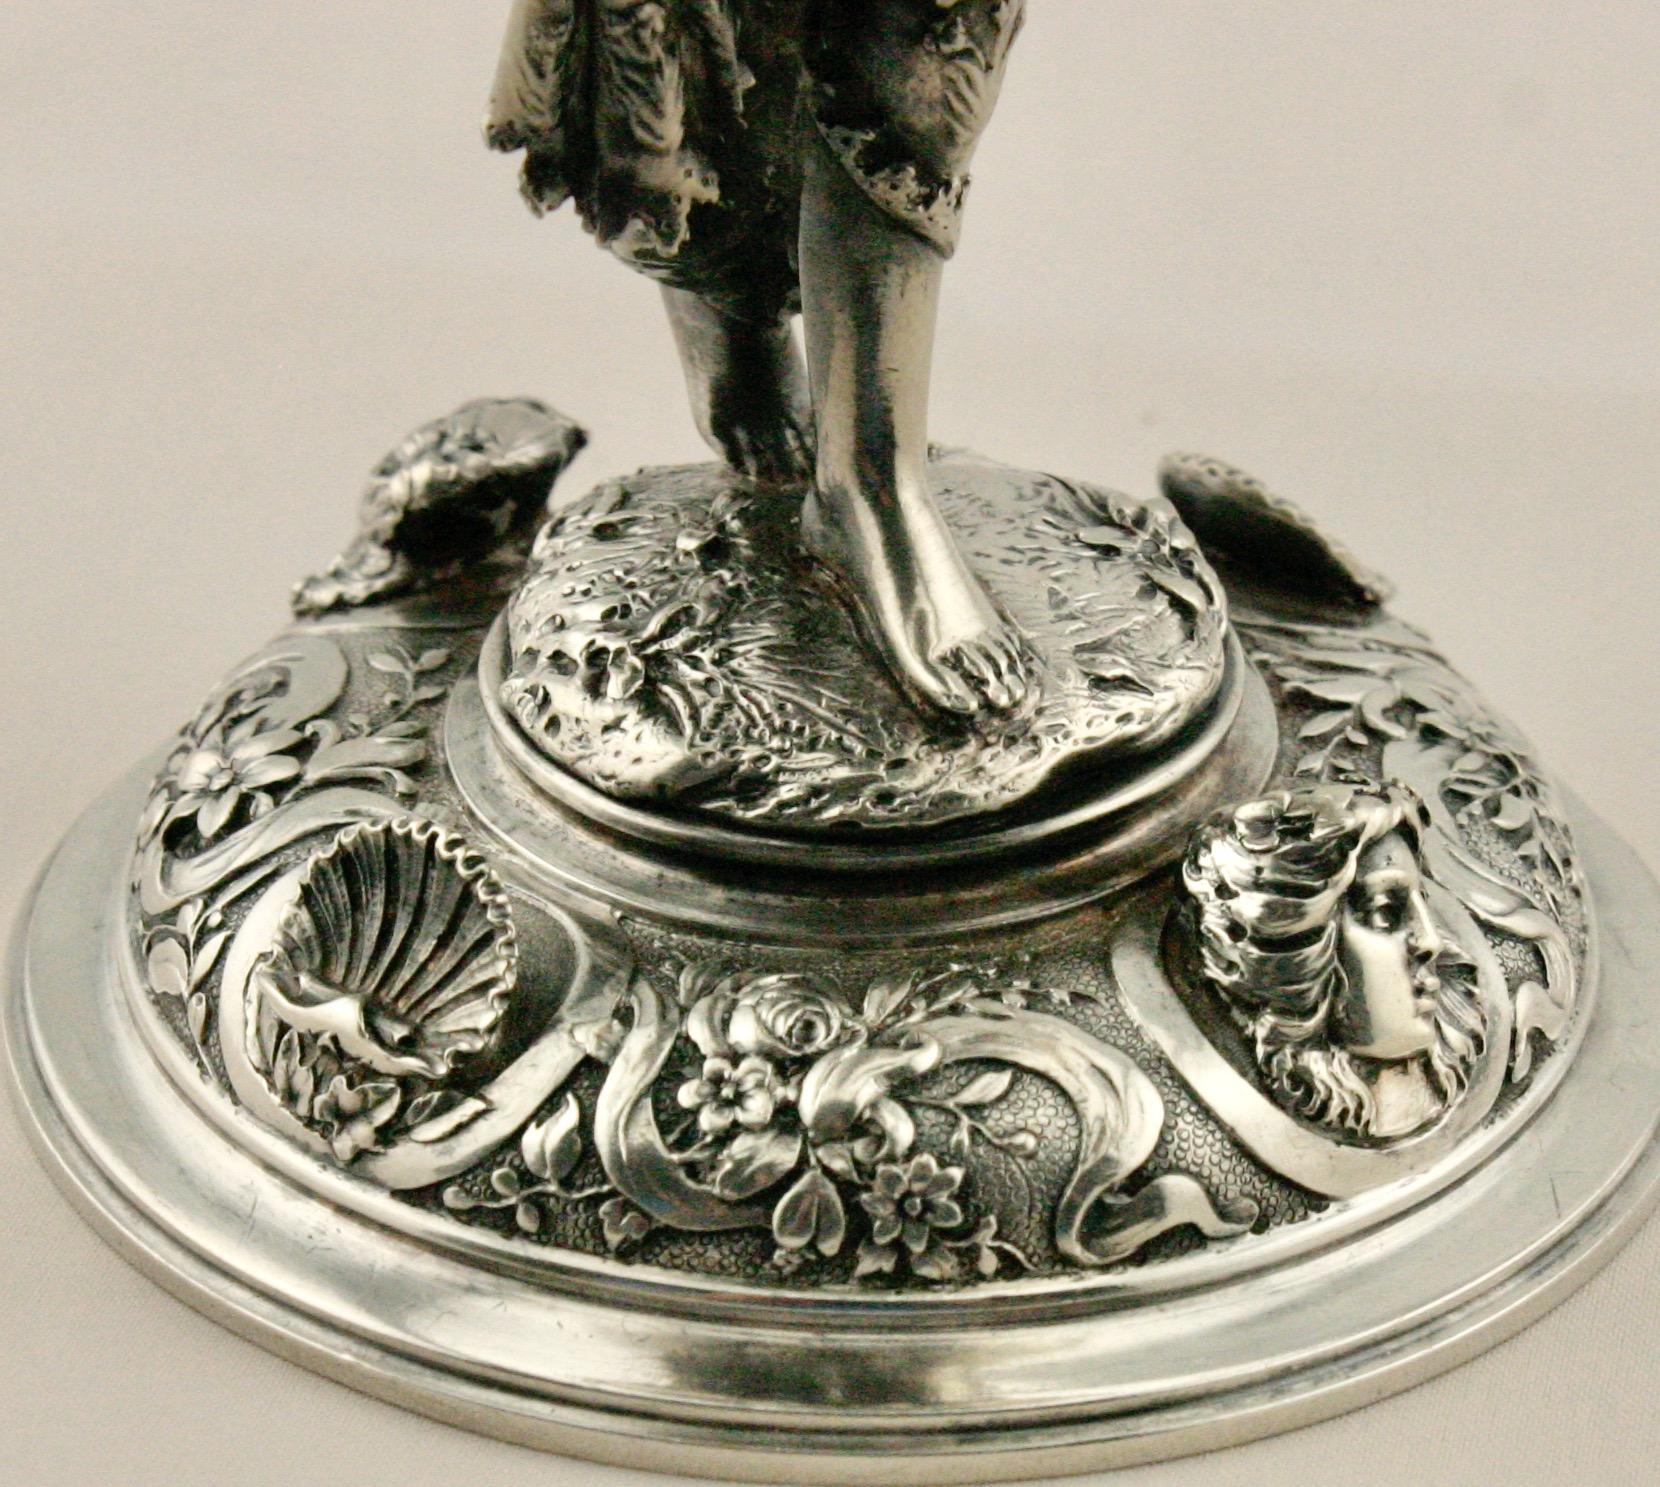 Cast Italian Silver Figural Compote of Flora by G. Accarisi, Florence